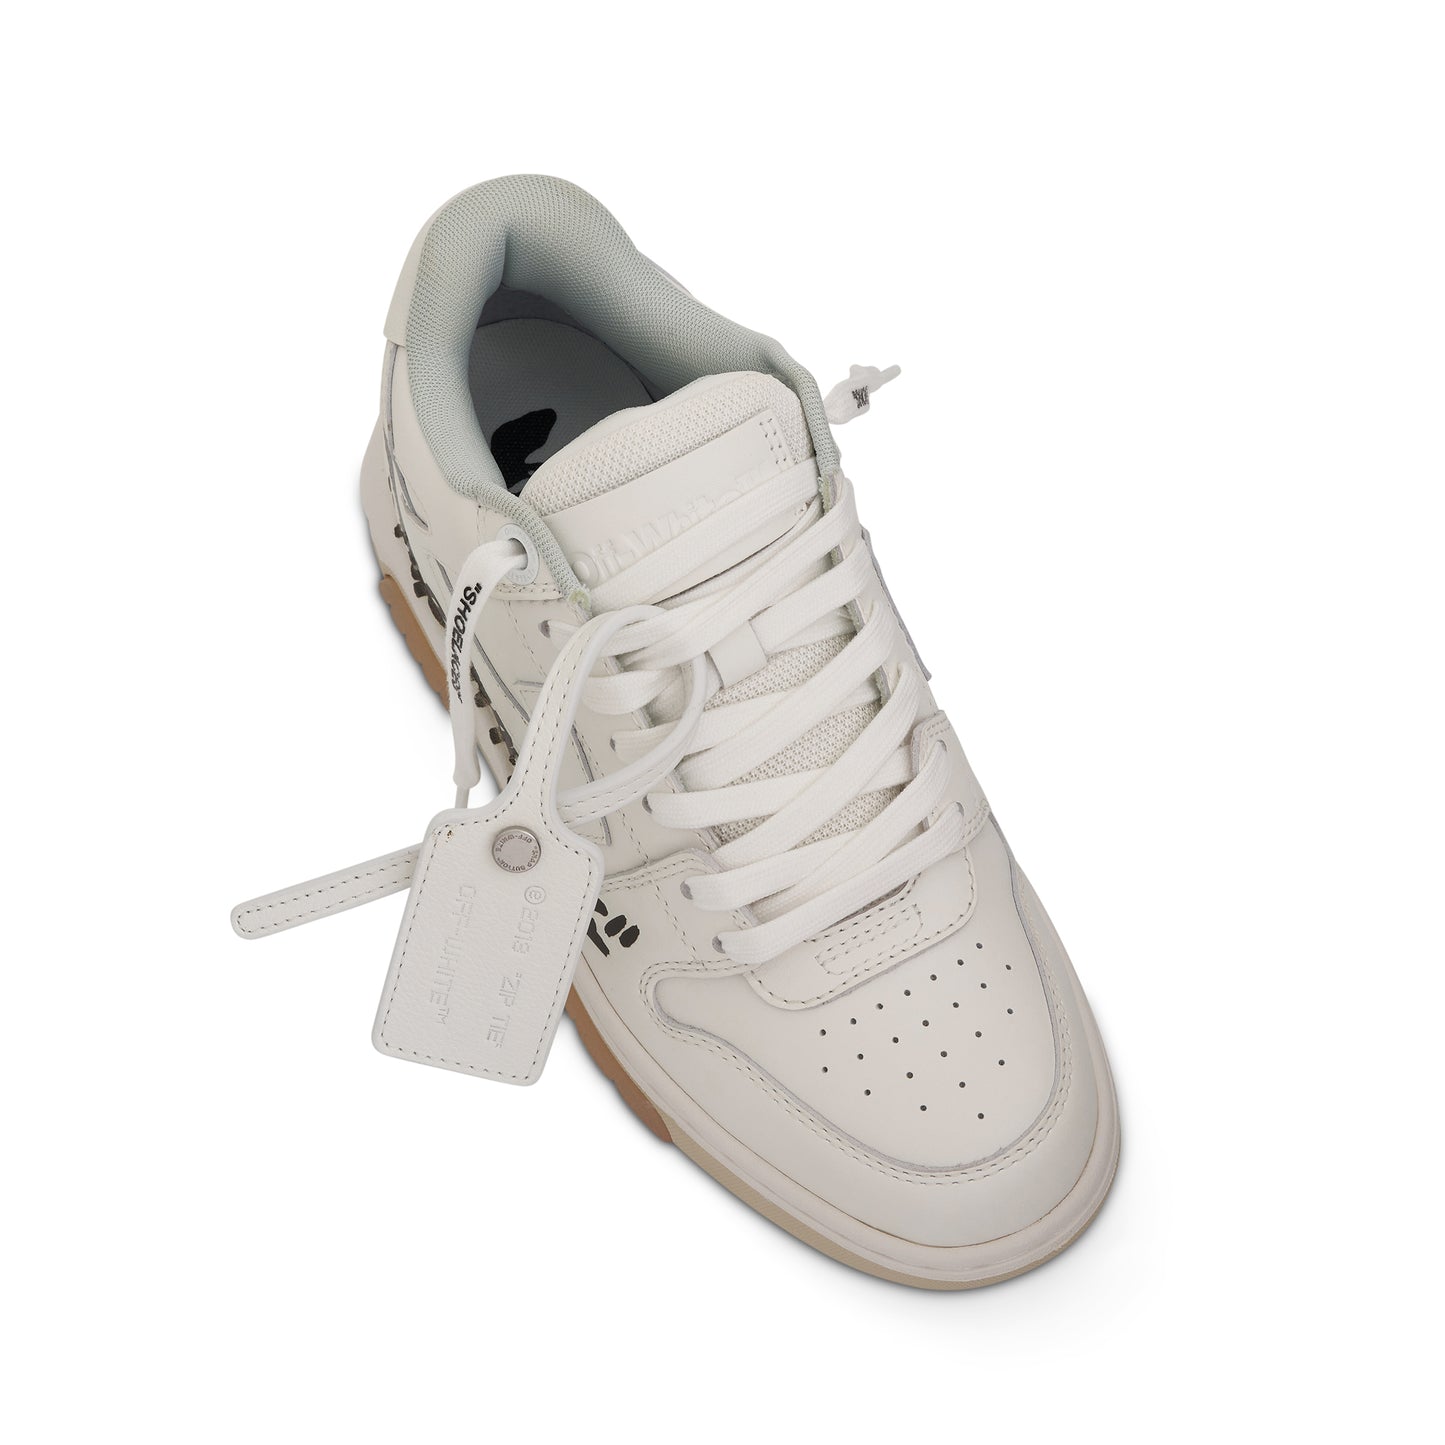 Out Of Office 'For Walking' Leather Sneakers in White/Black